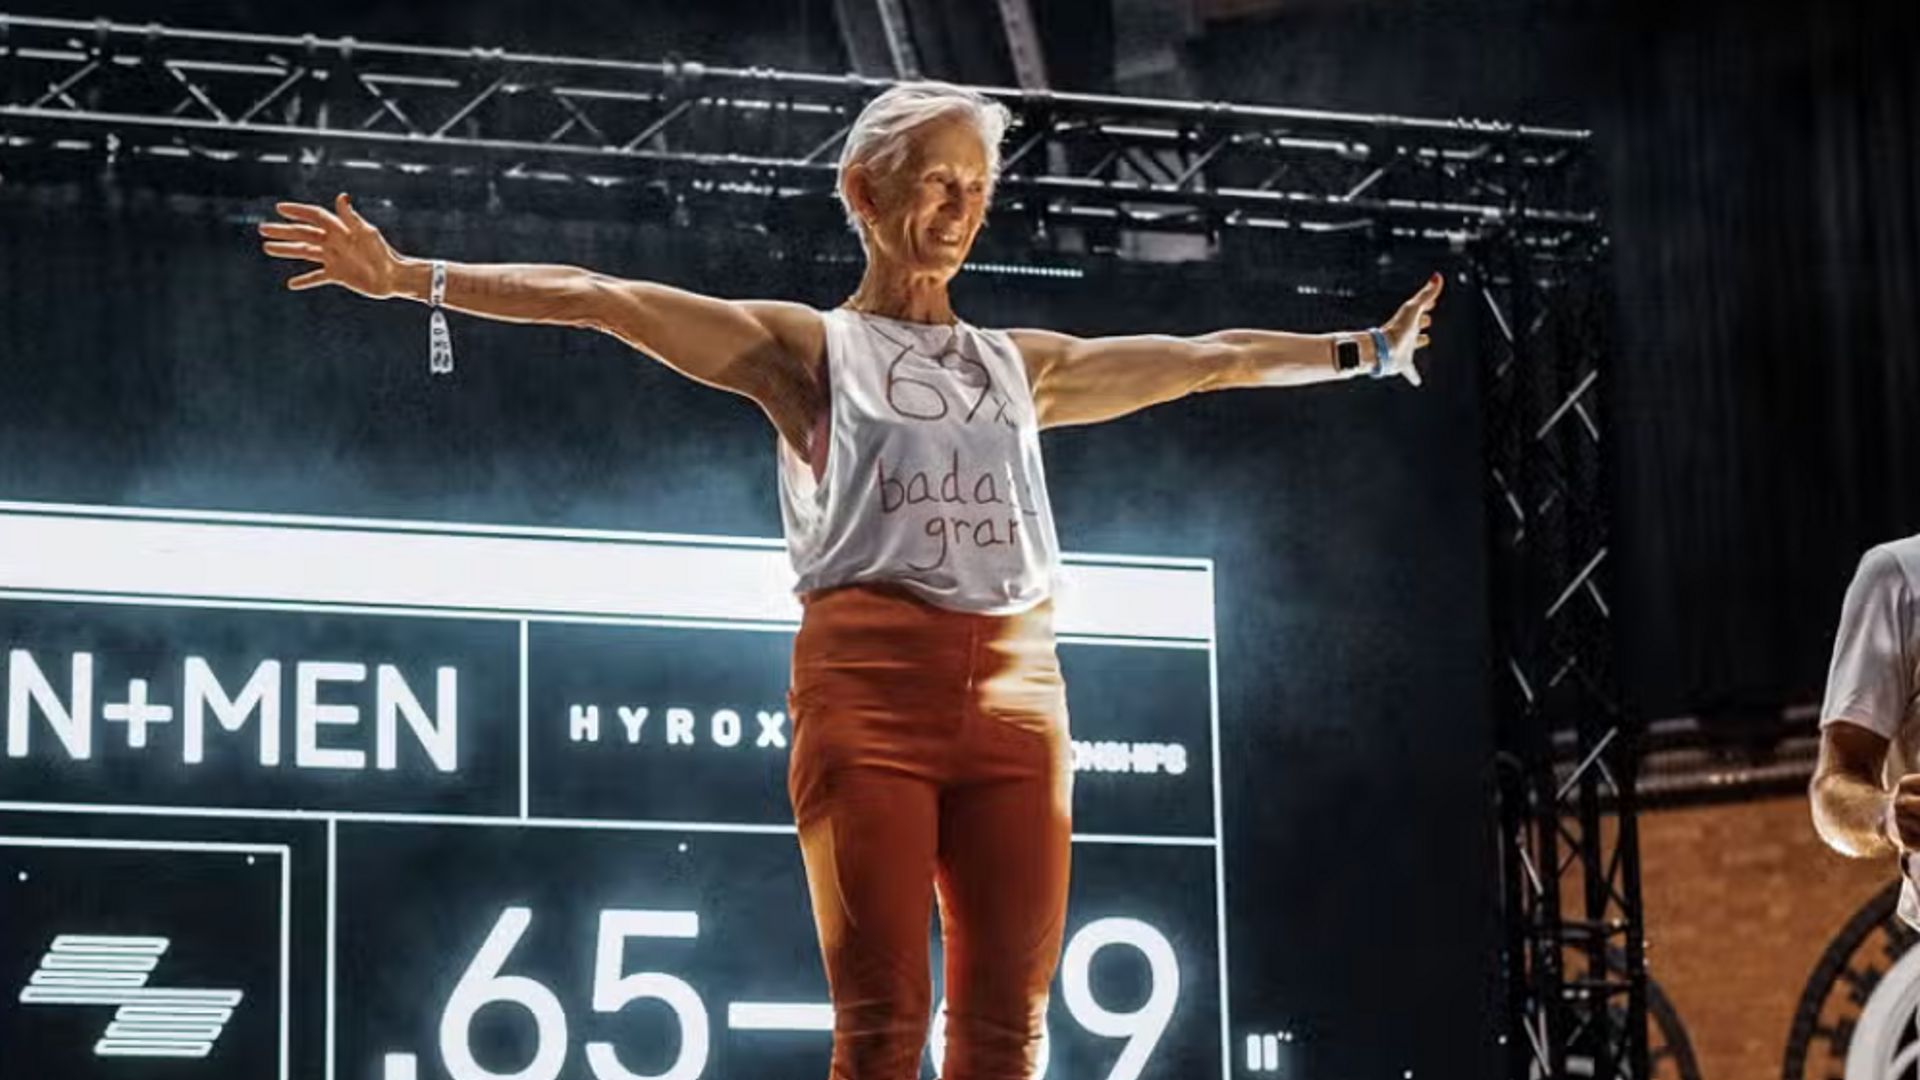 I'm fitter than ever at 70 – and I'm insanely proud